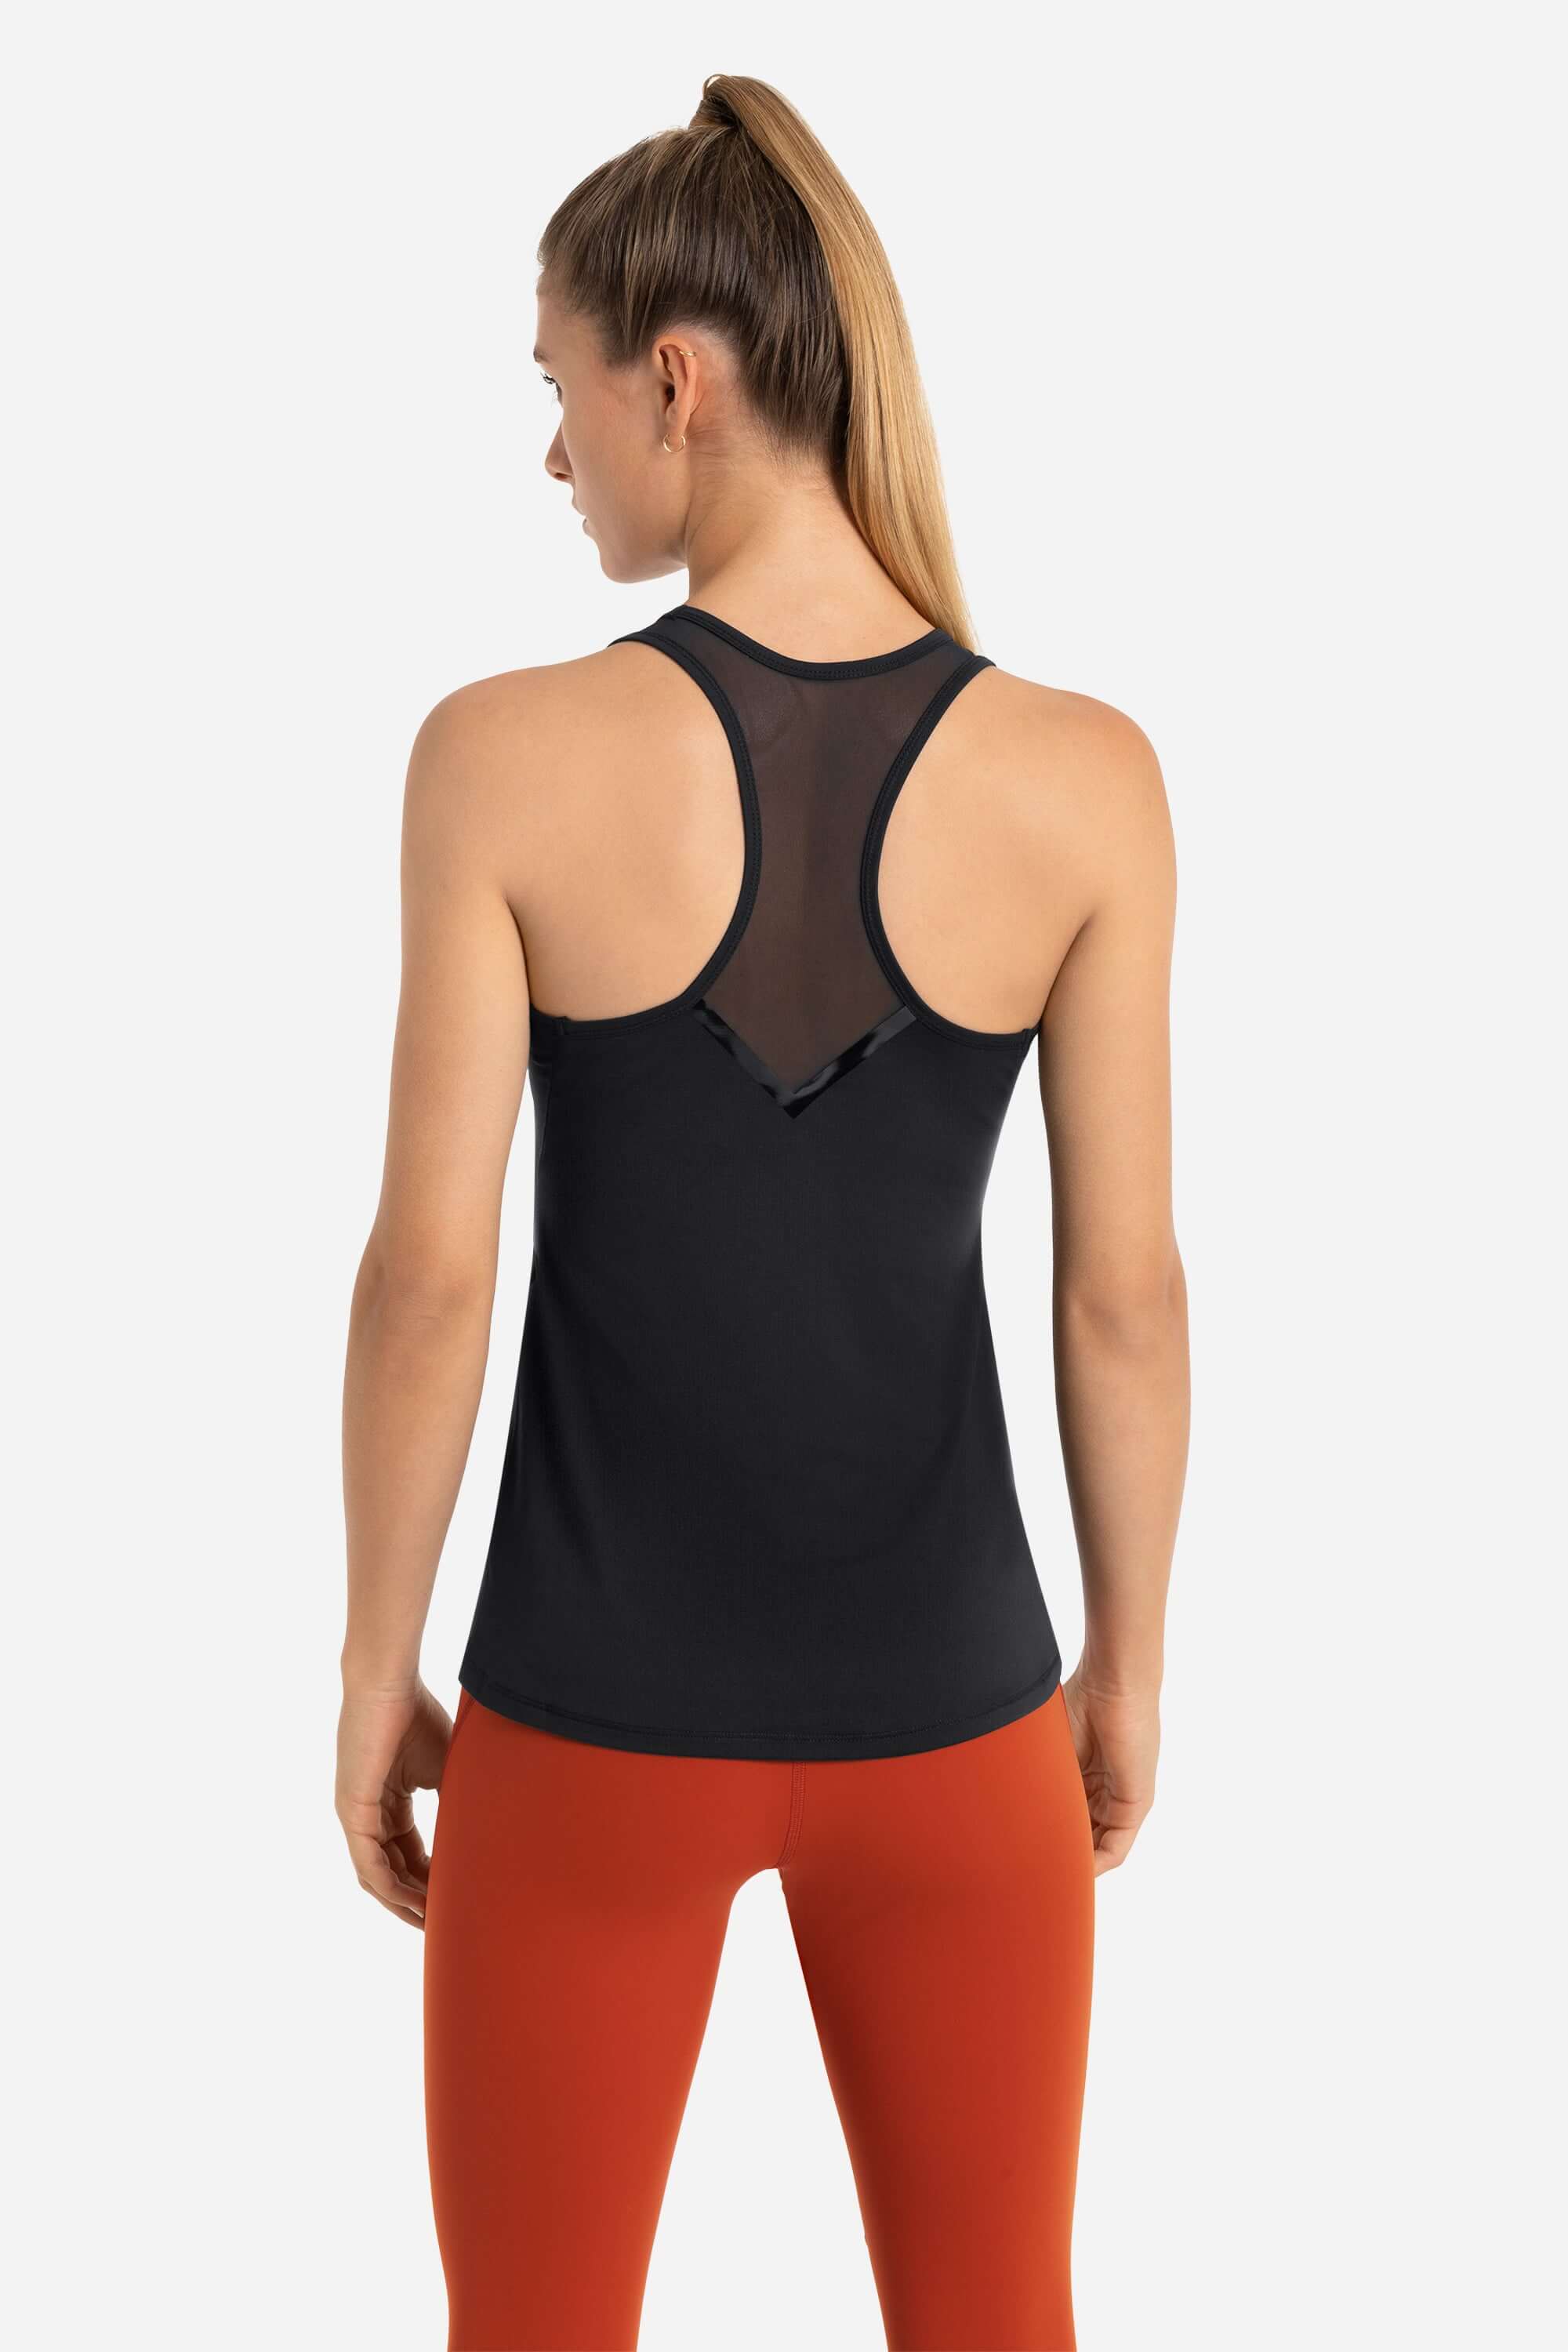 Women wearing a black workout tank top in black and red gym leggings from AYCANE